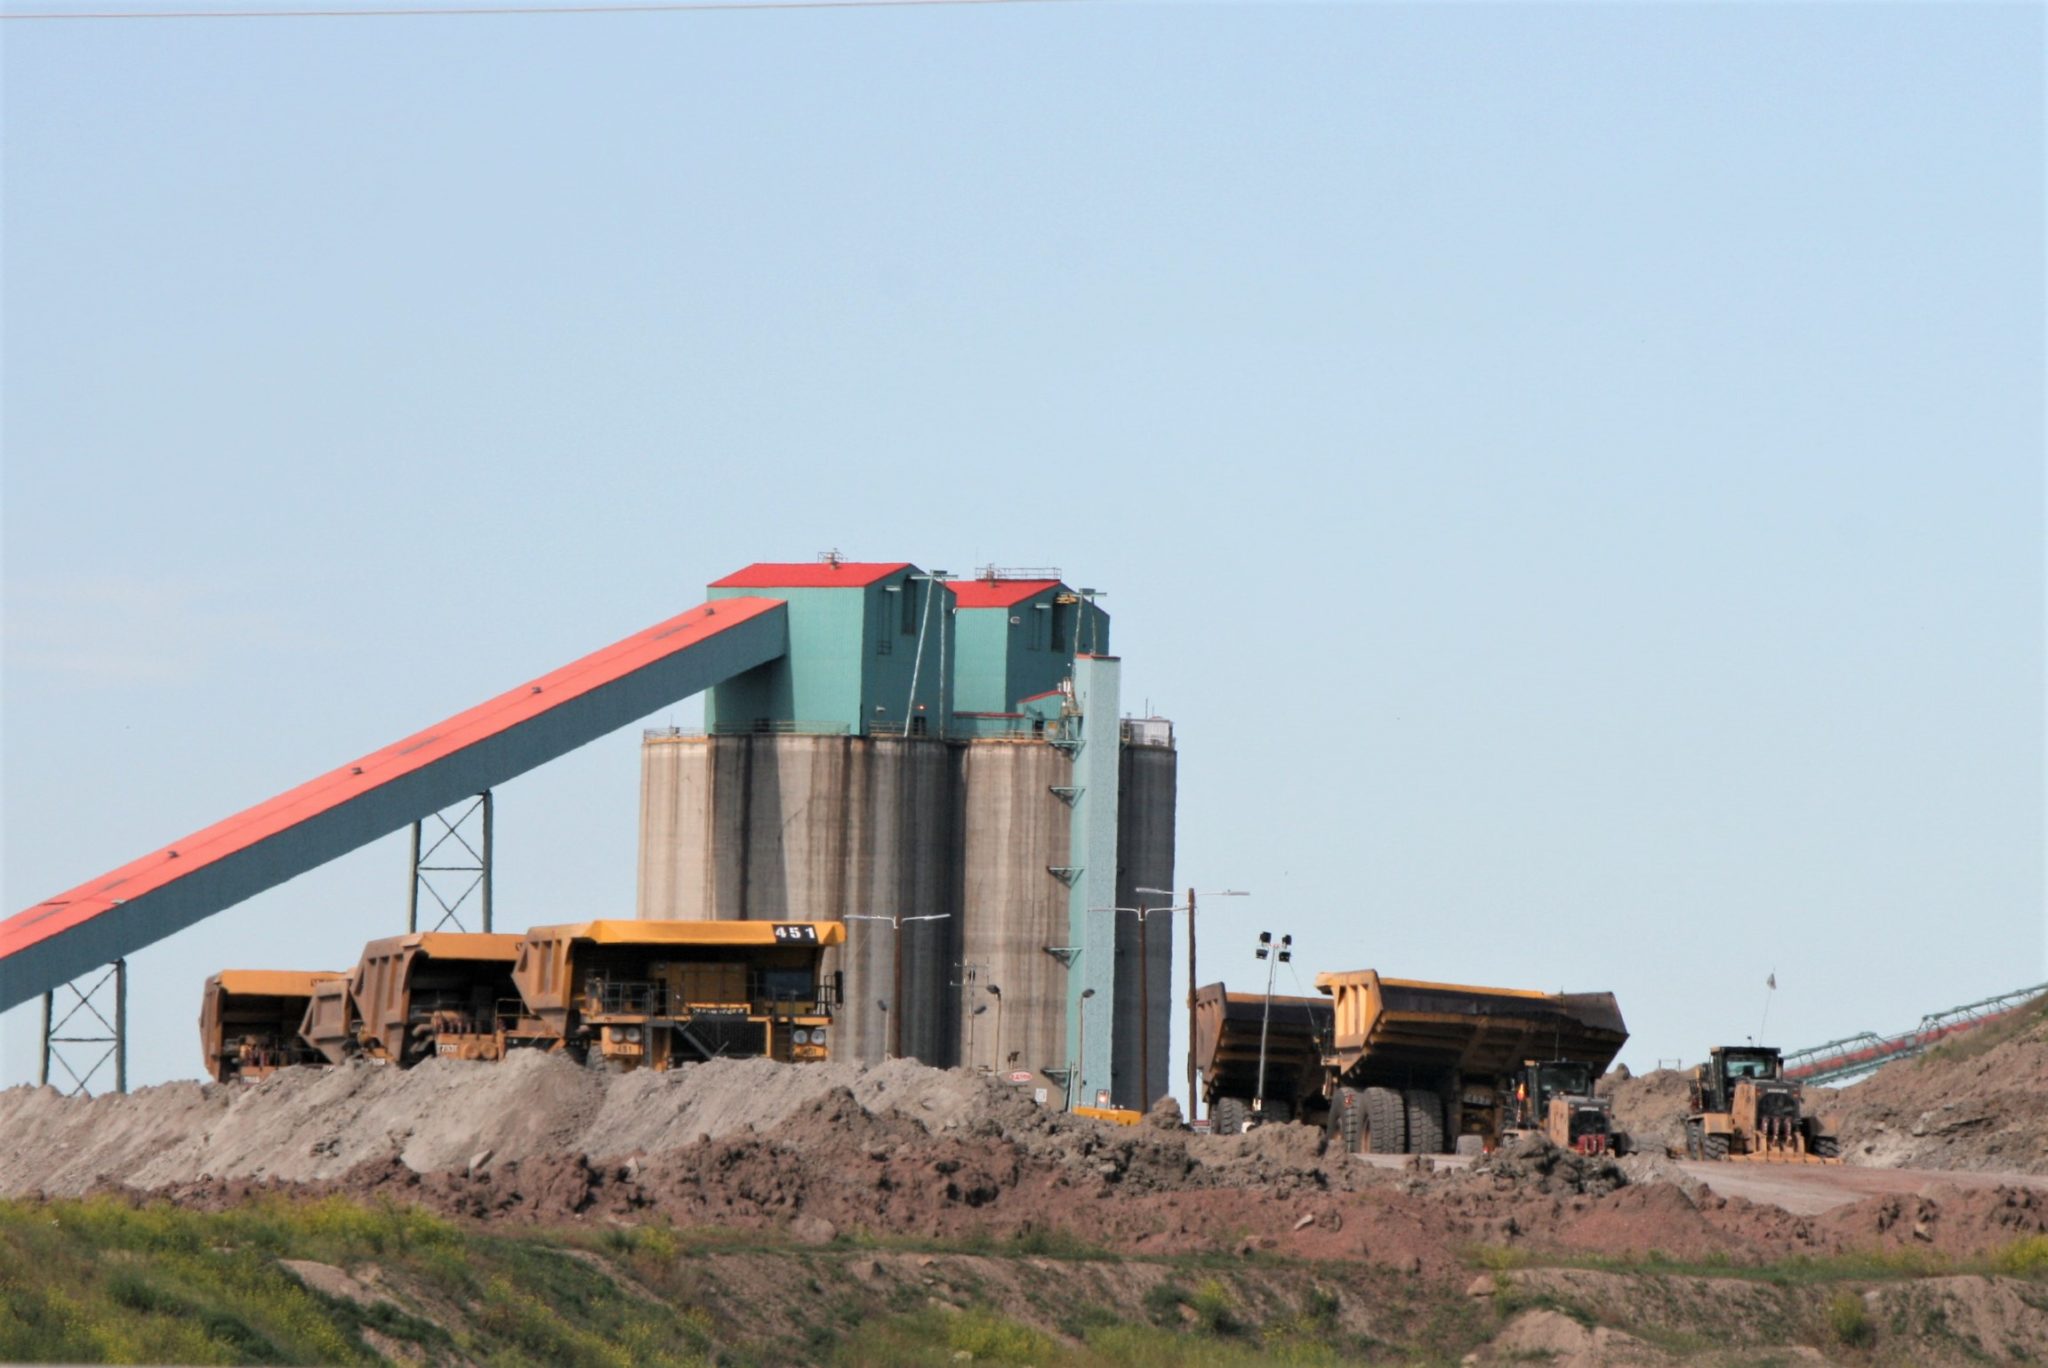 Wyoming’s numbers putting mining job losses at 25% are misleading, industry group says